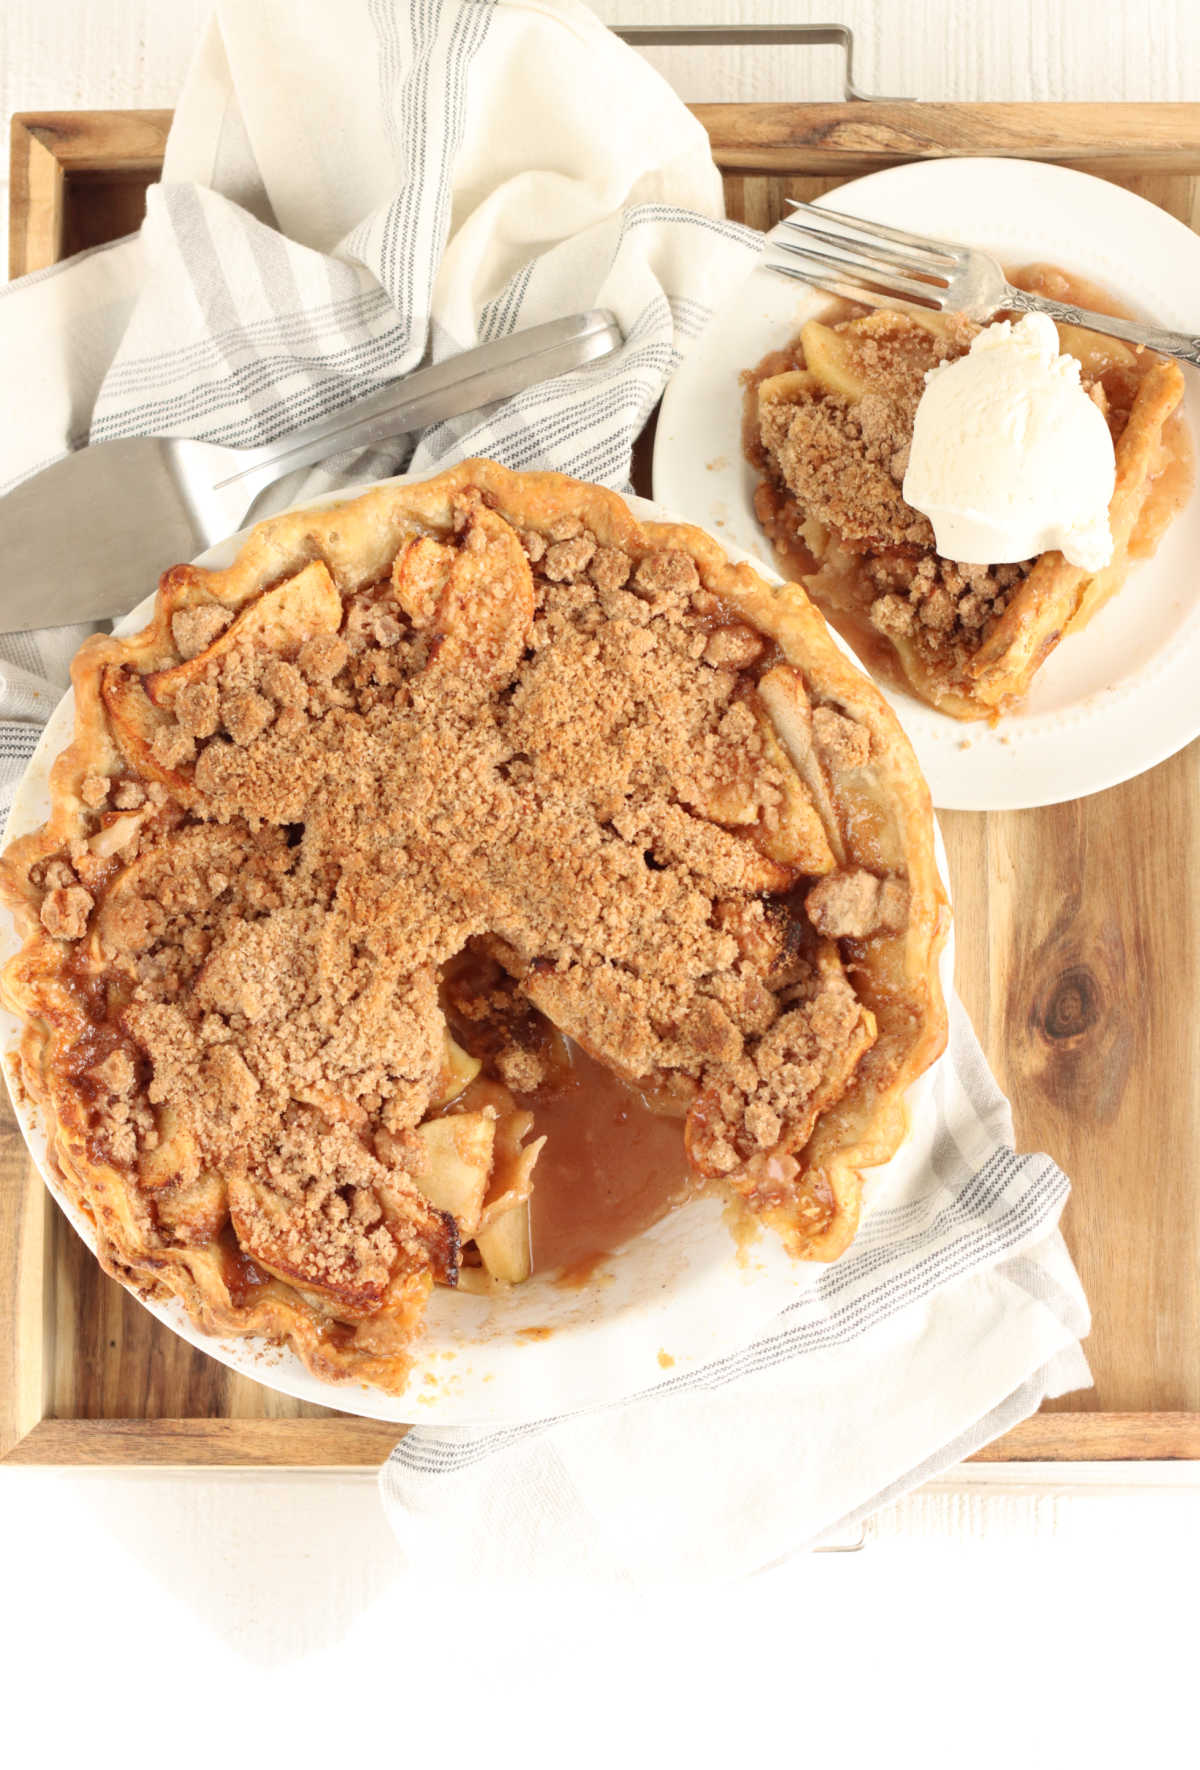 Apple pie with crumb topping, slice missing in wooden box, slice on small white plate with fork.